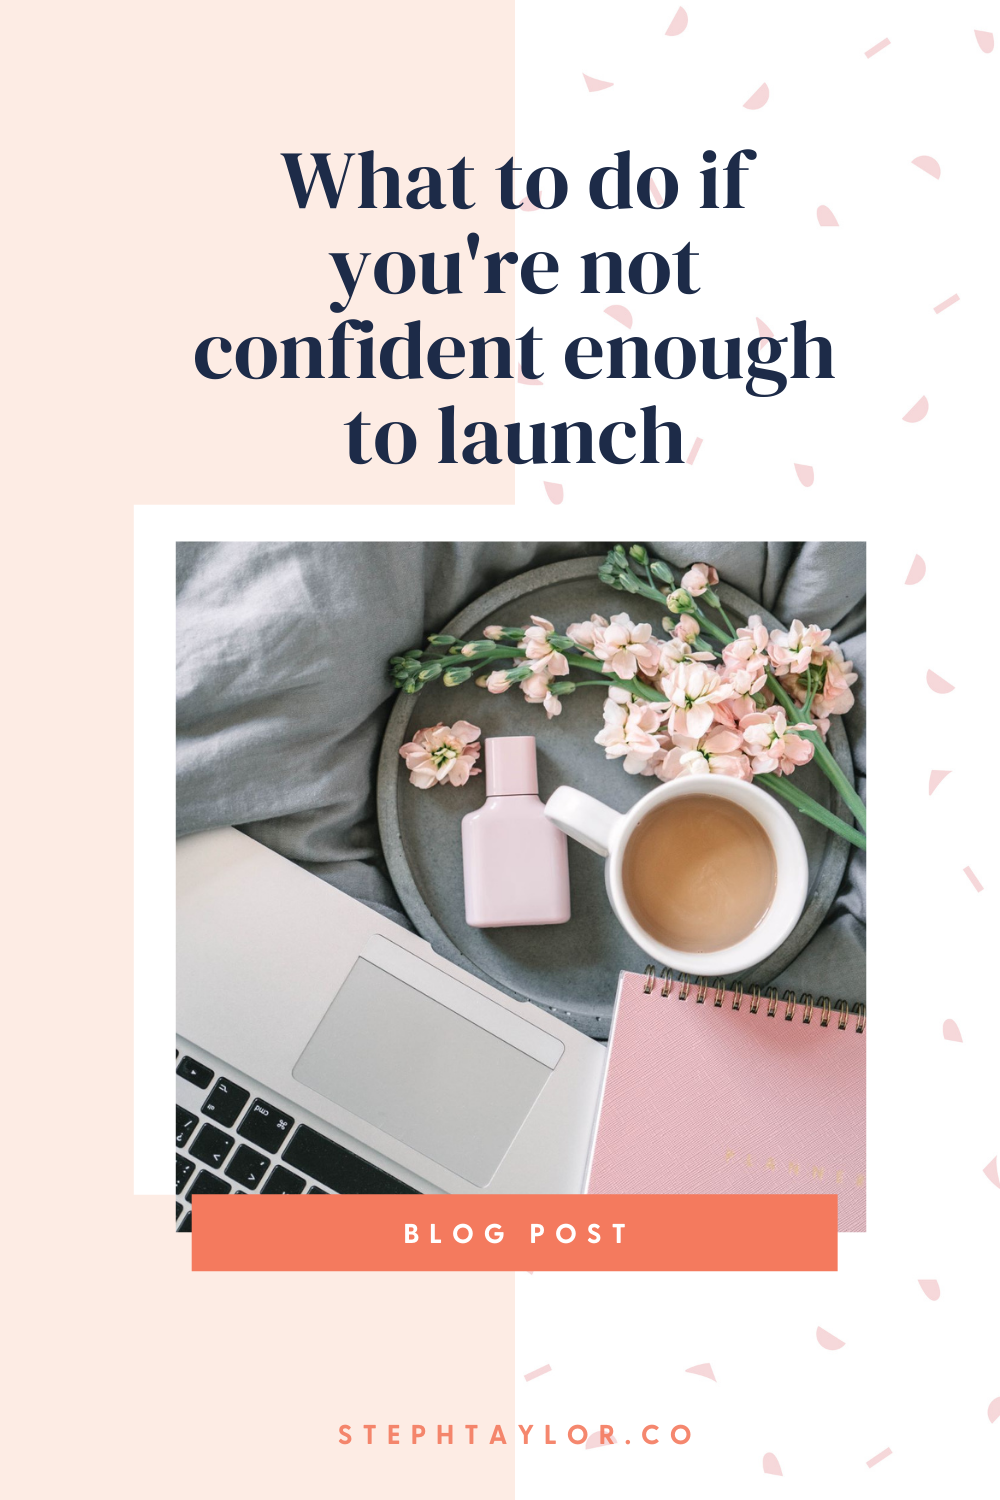 What to do if you're not confident enough to launch